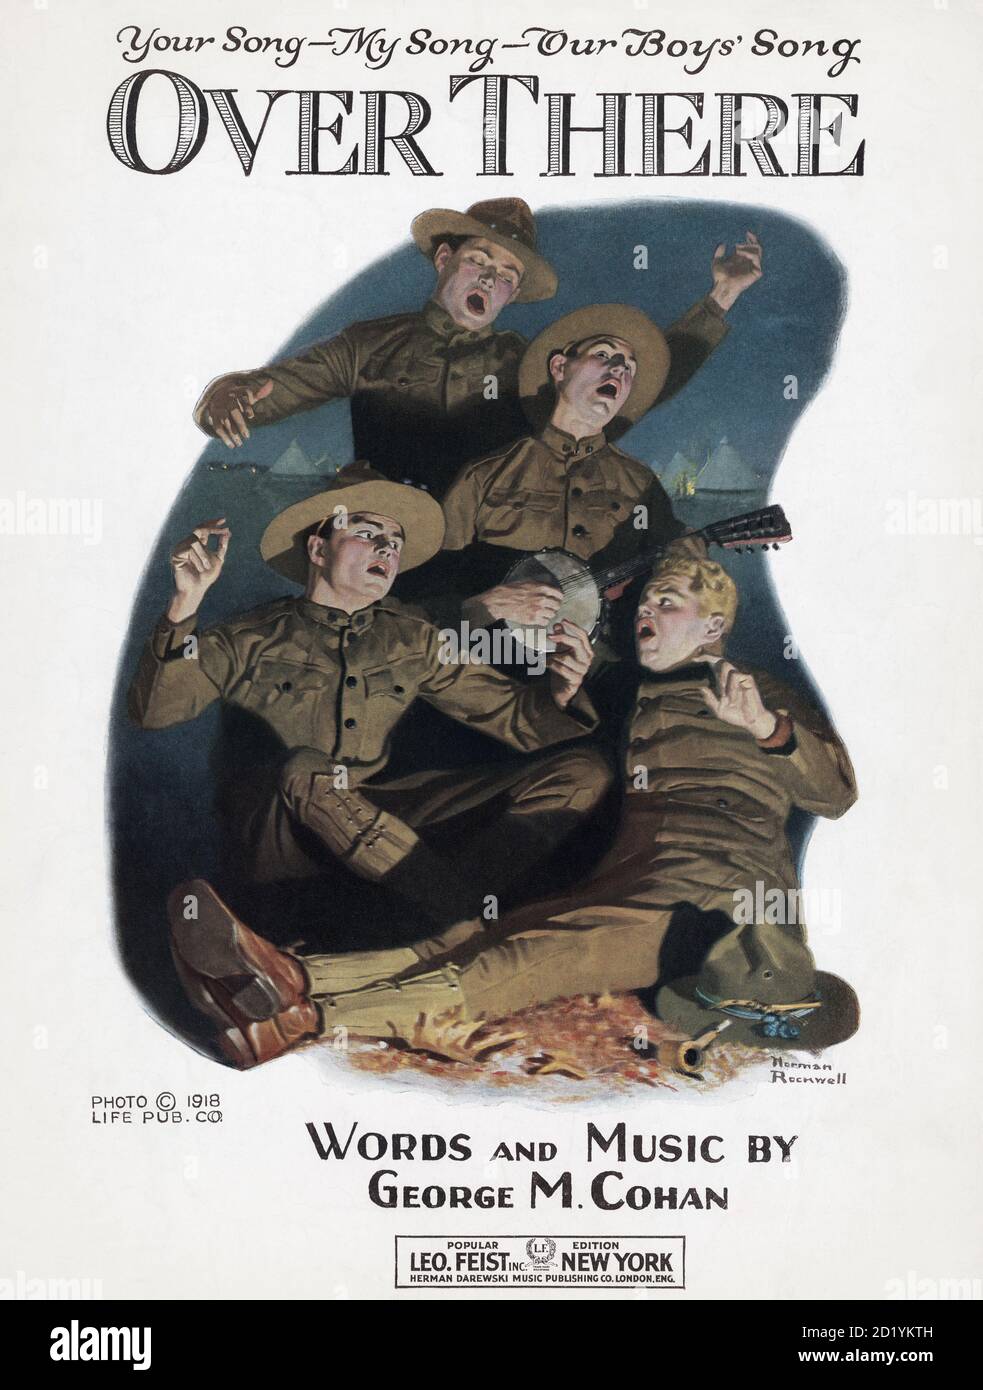 Cover of 1918 sheet music edition of the popular patriotic World War One song Over There, words and music by George M. Cohan. Stock Photo